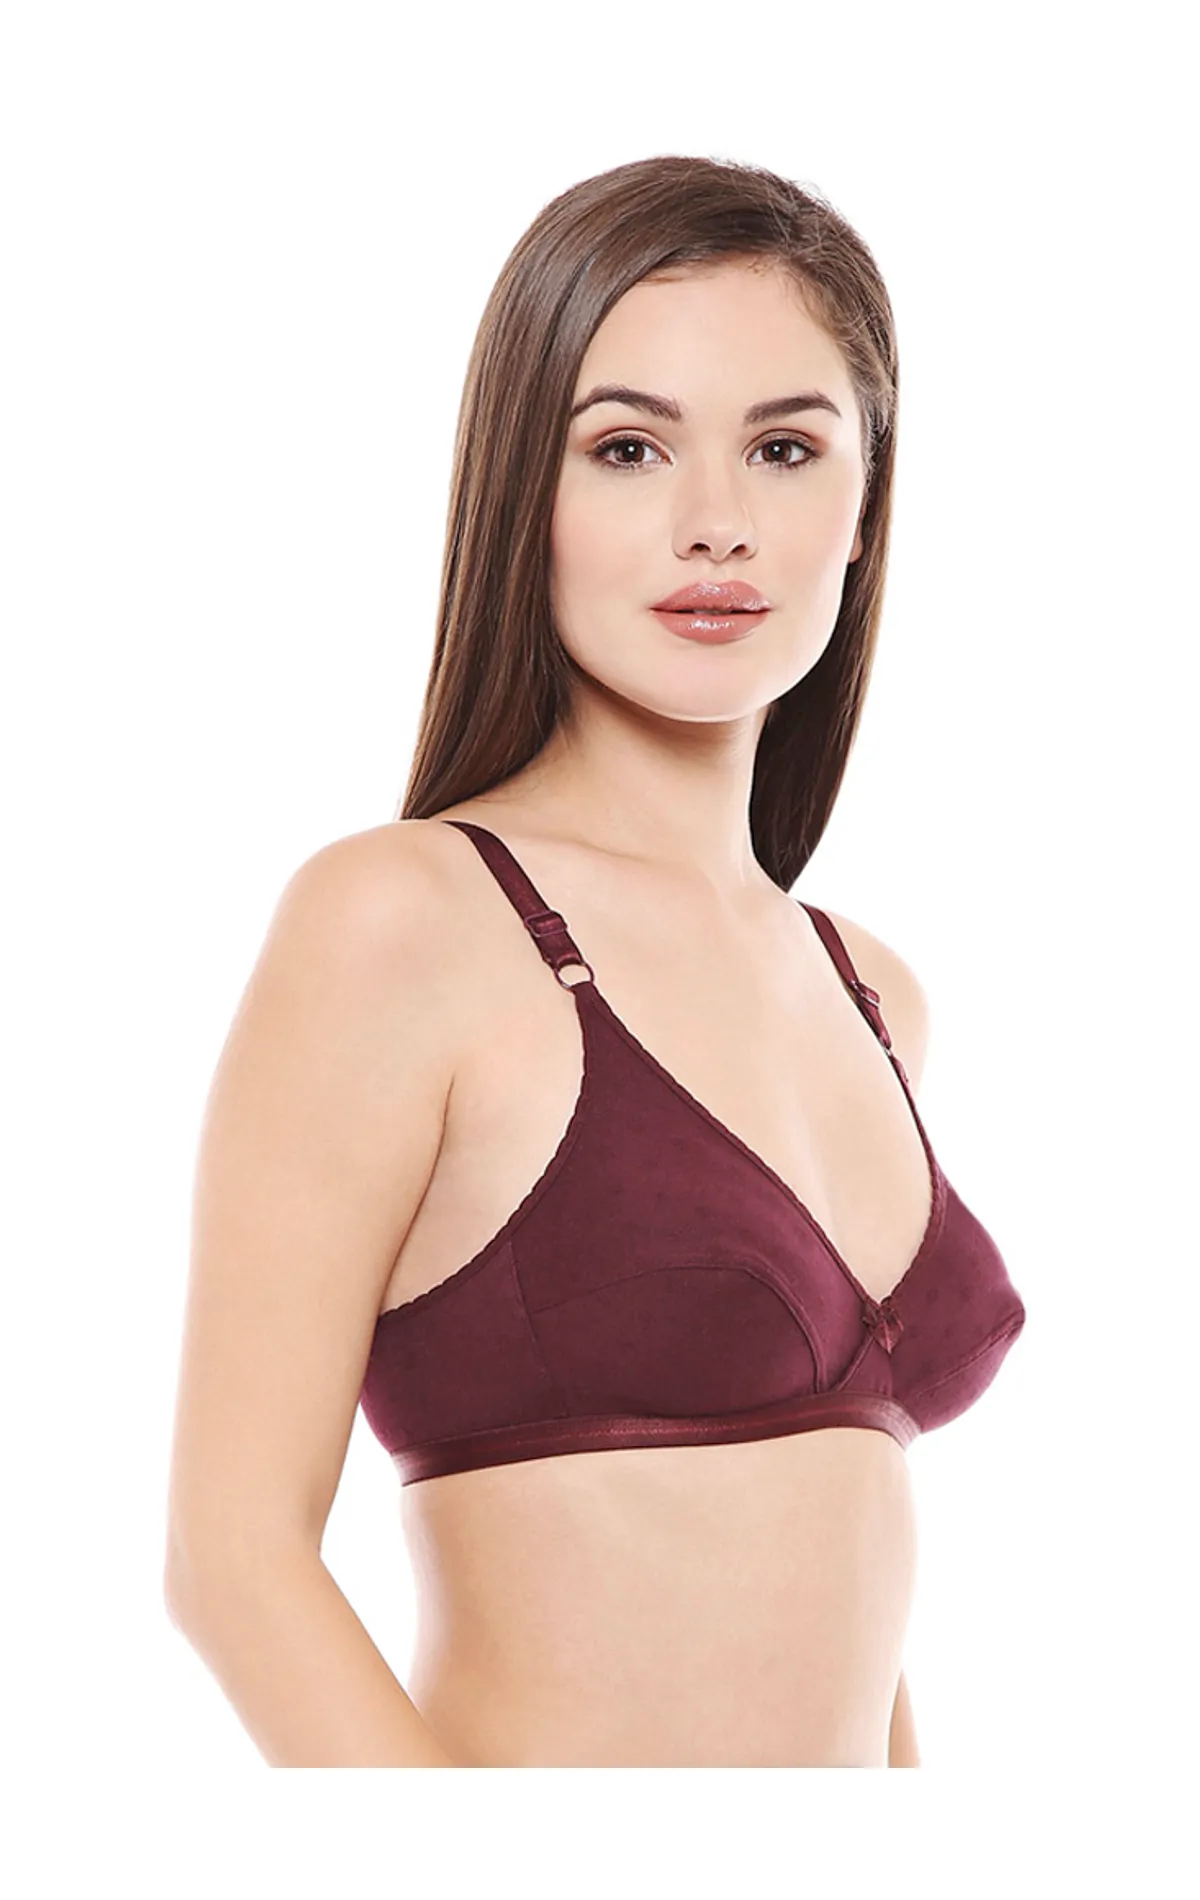 Bodycare 32B Size Bras Price Starting From Rs 211